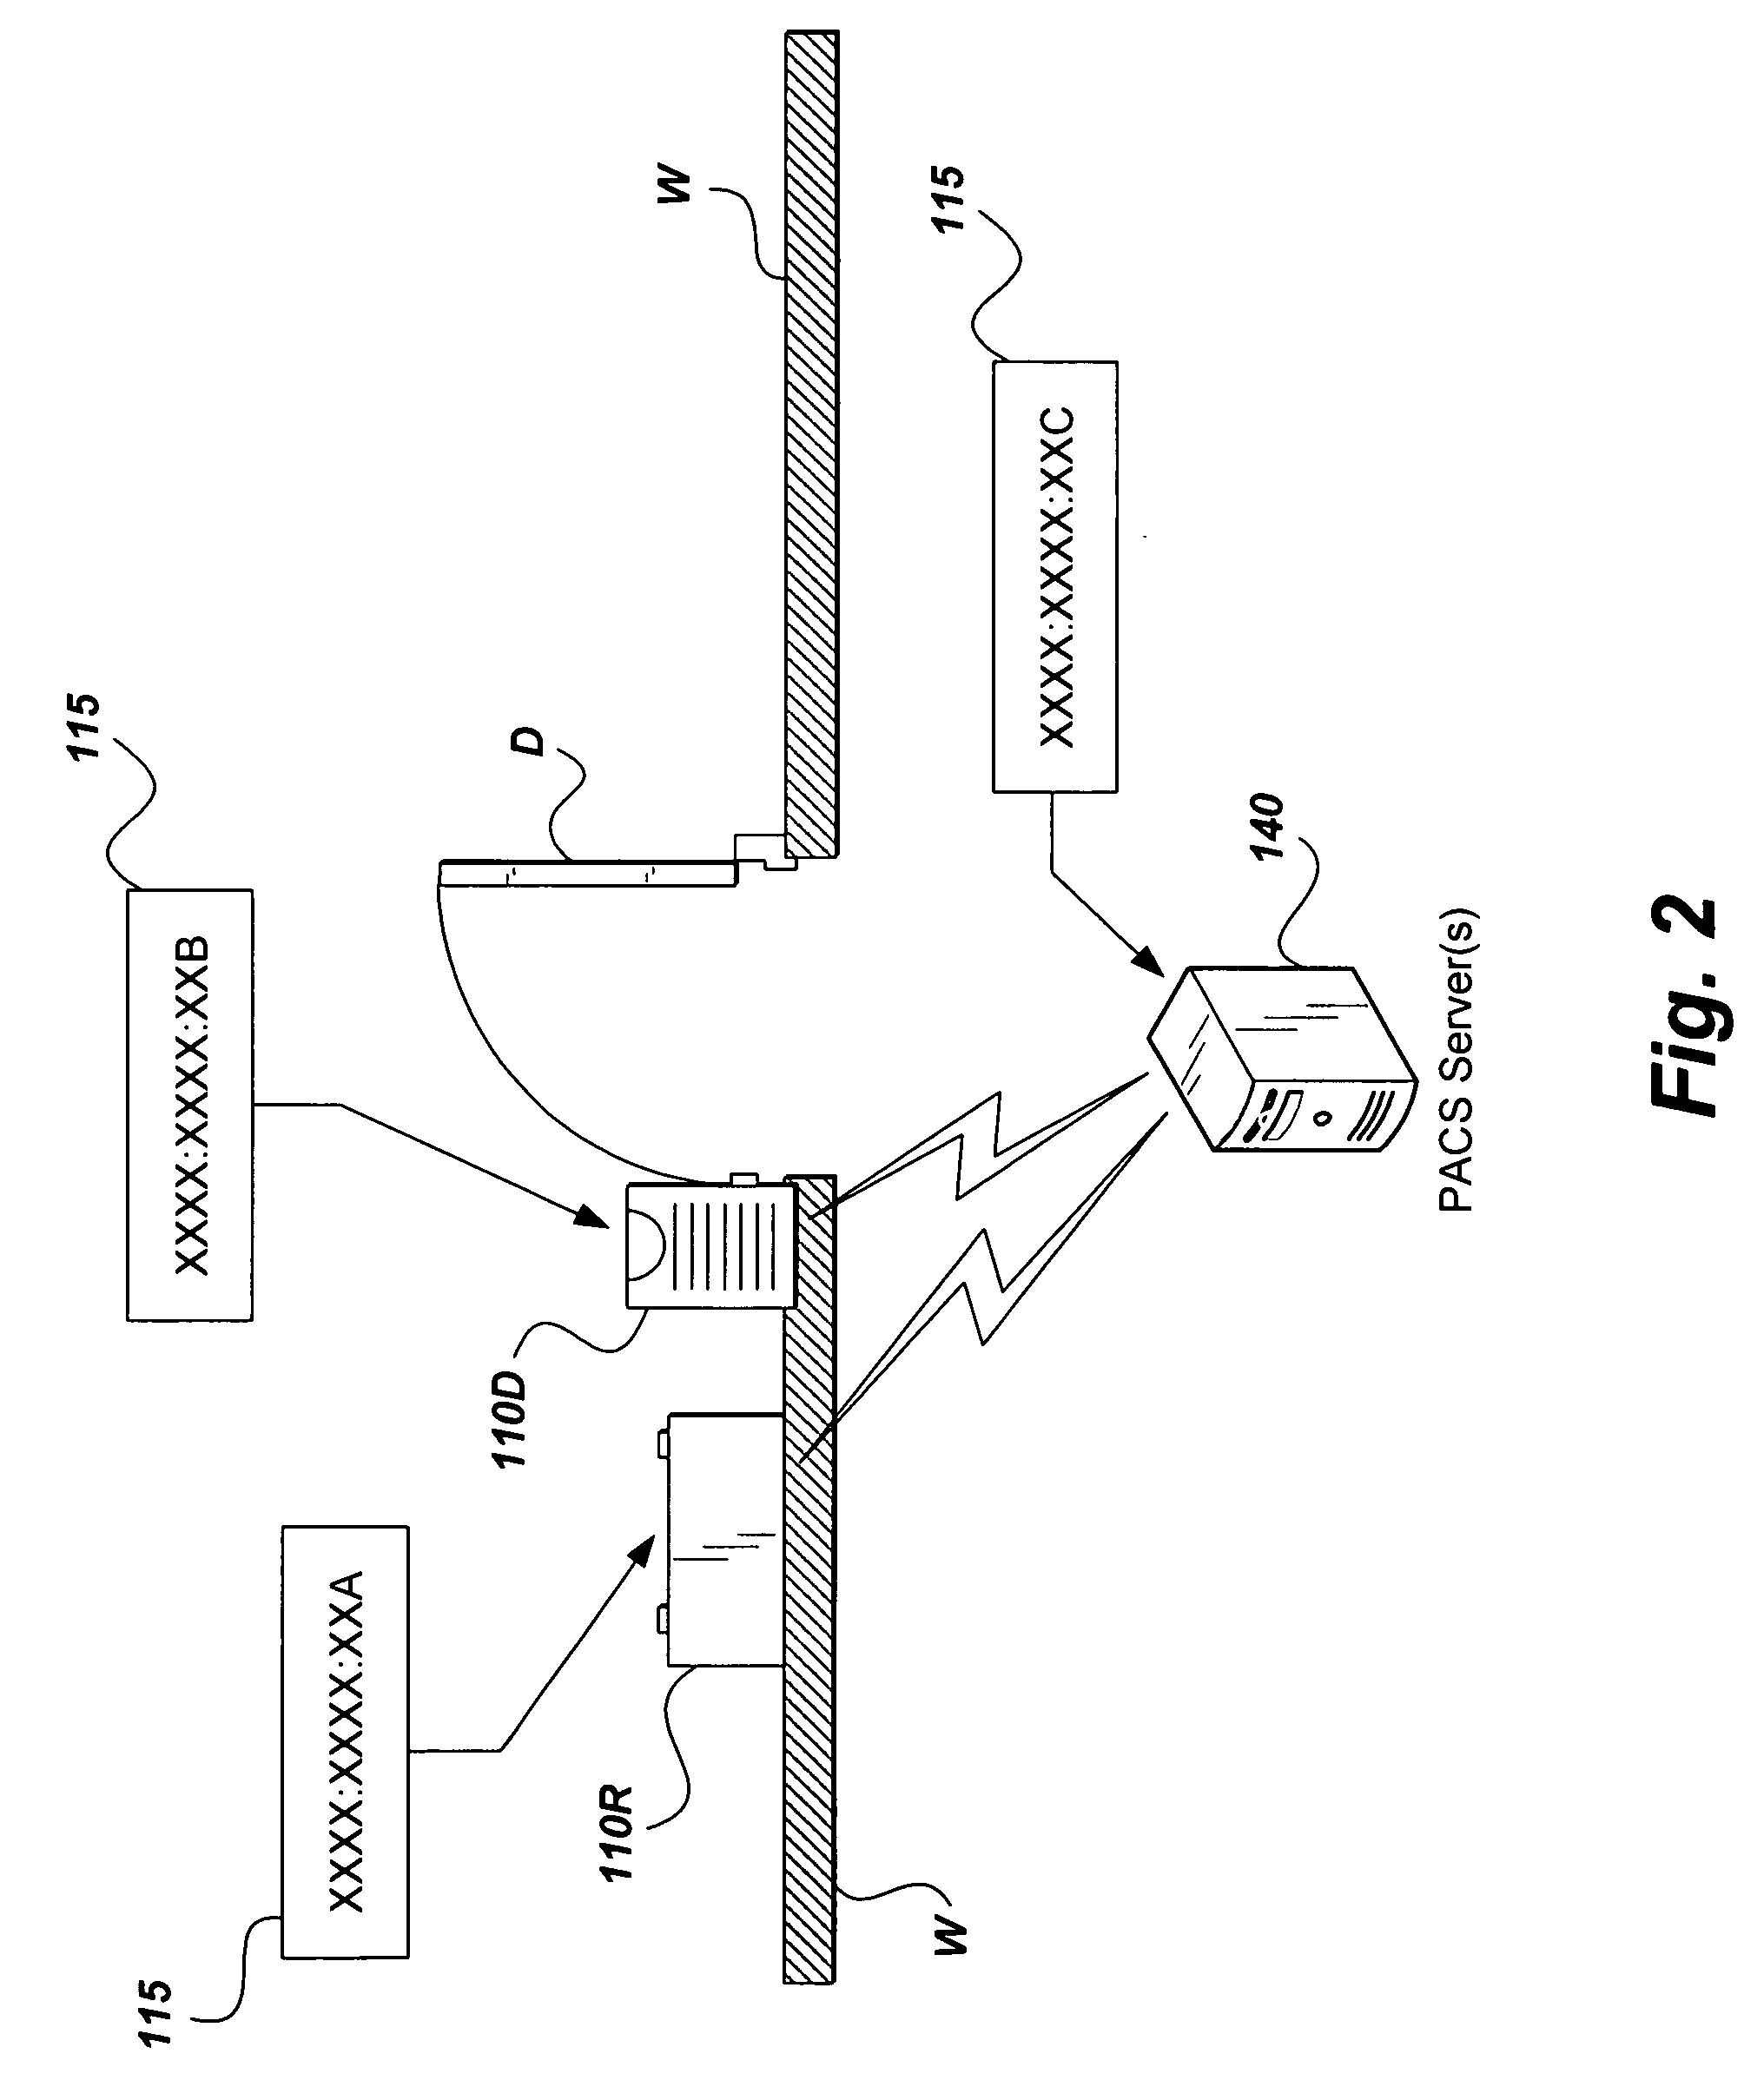 System and method for global access control